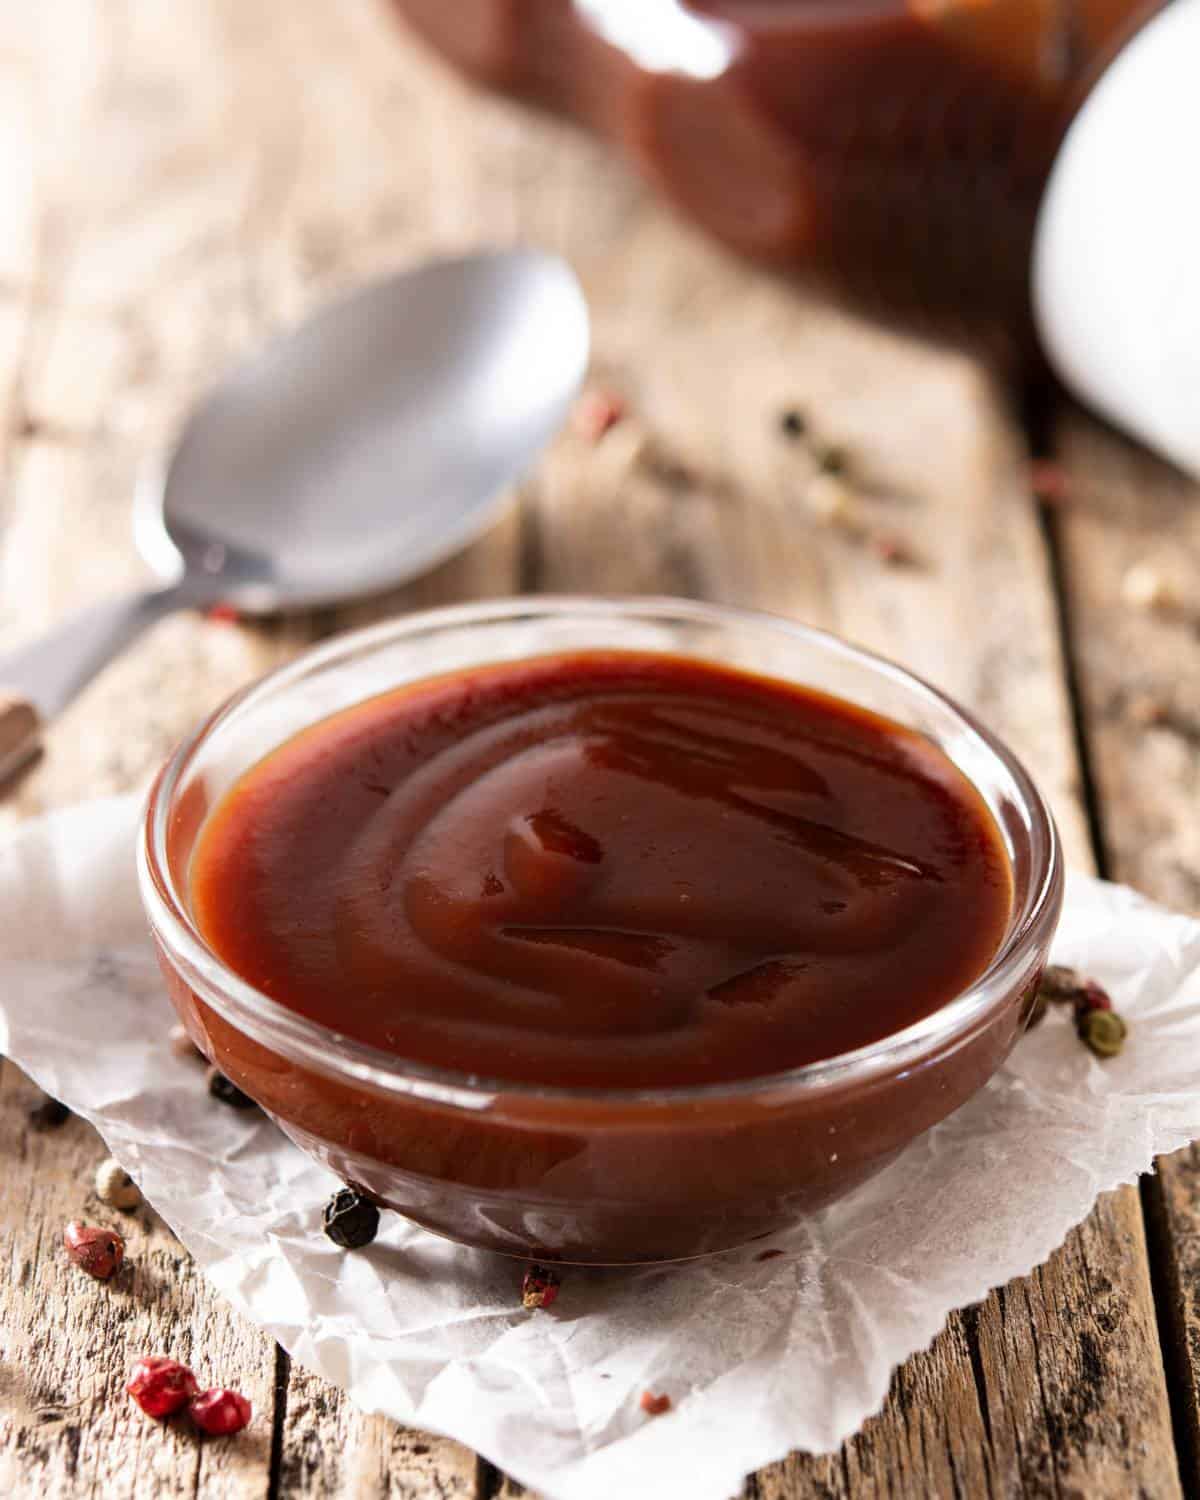 Bbq sauce in a bowl on a wooden table.